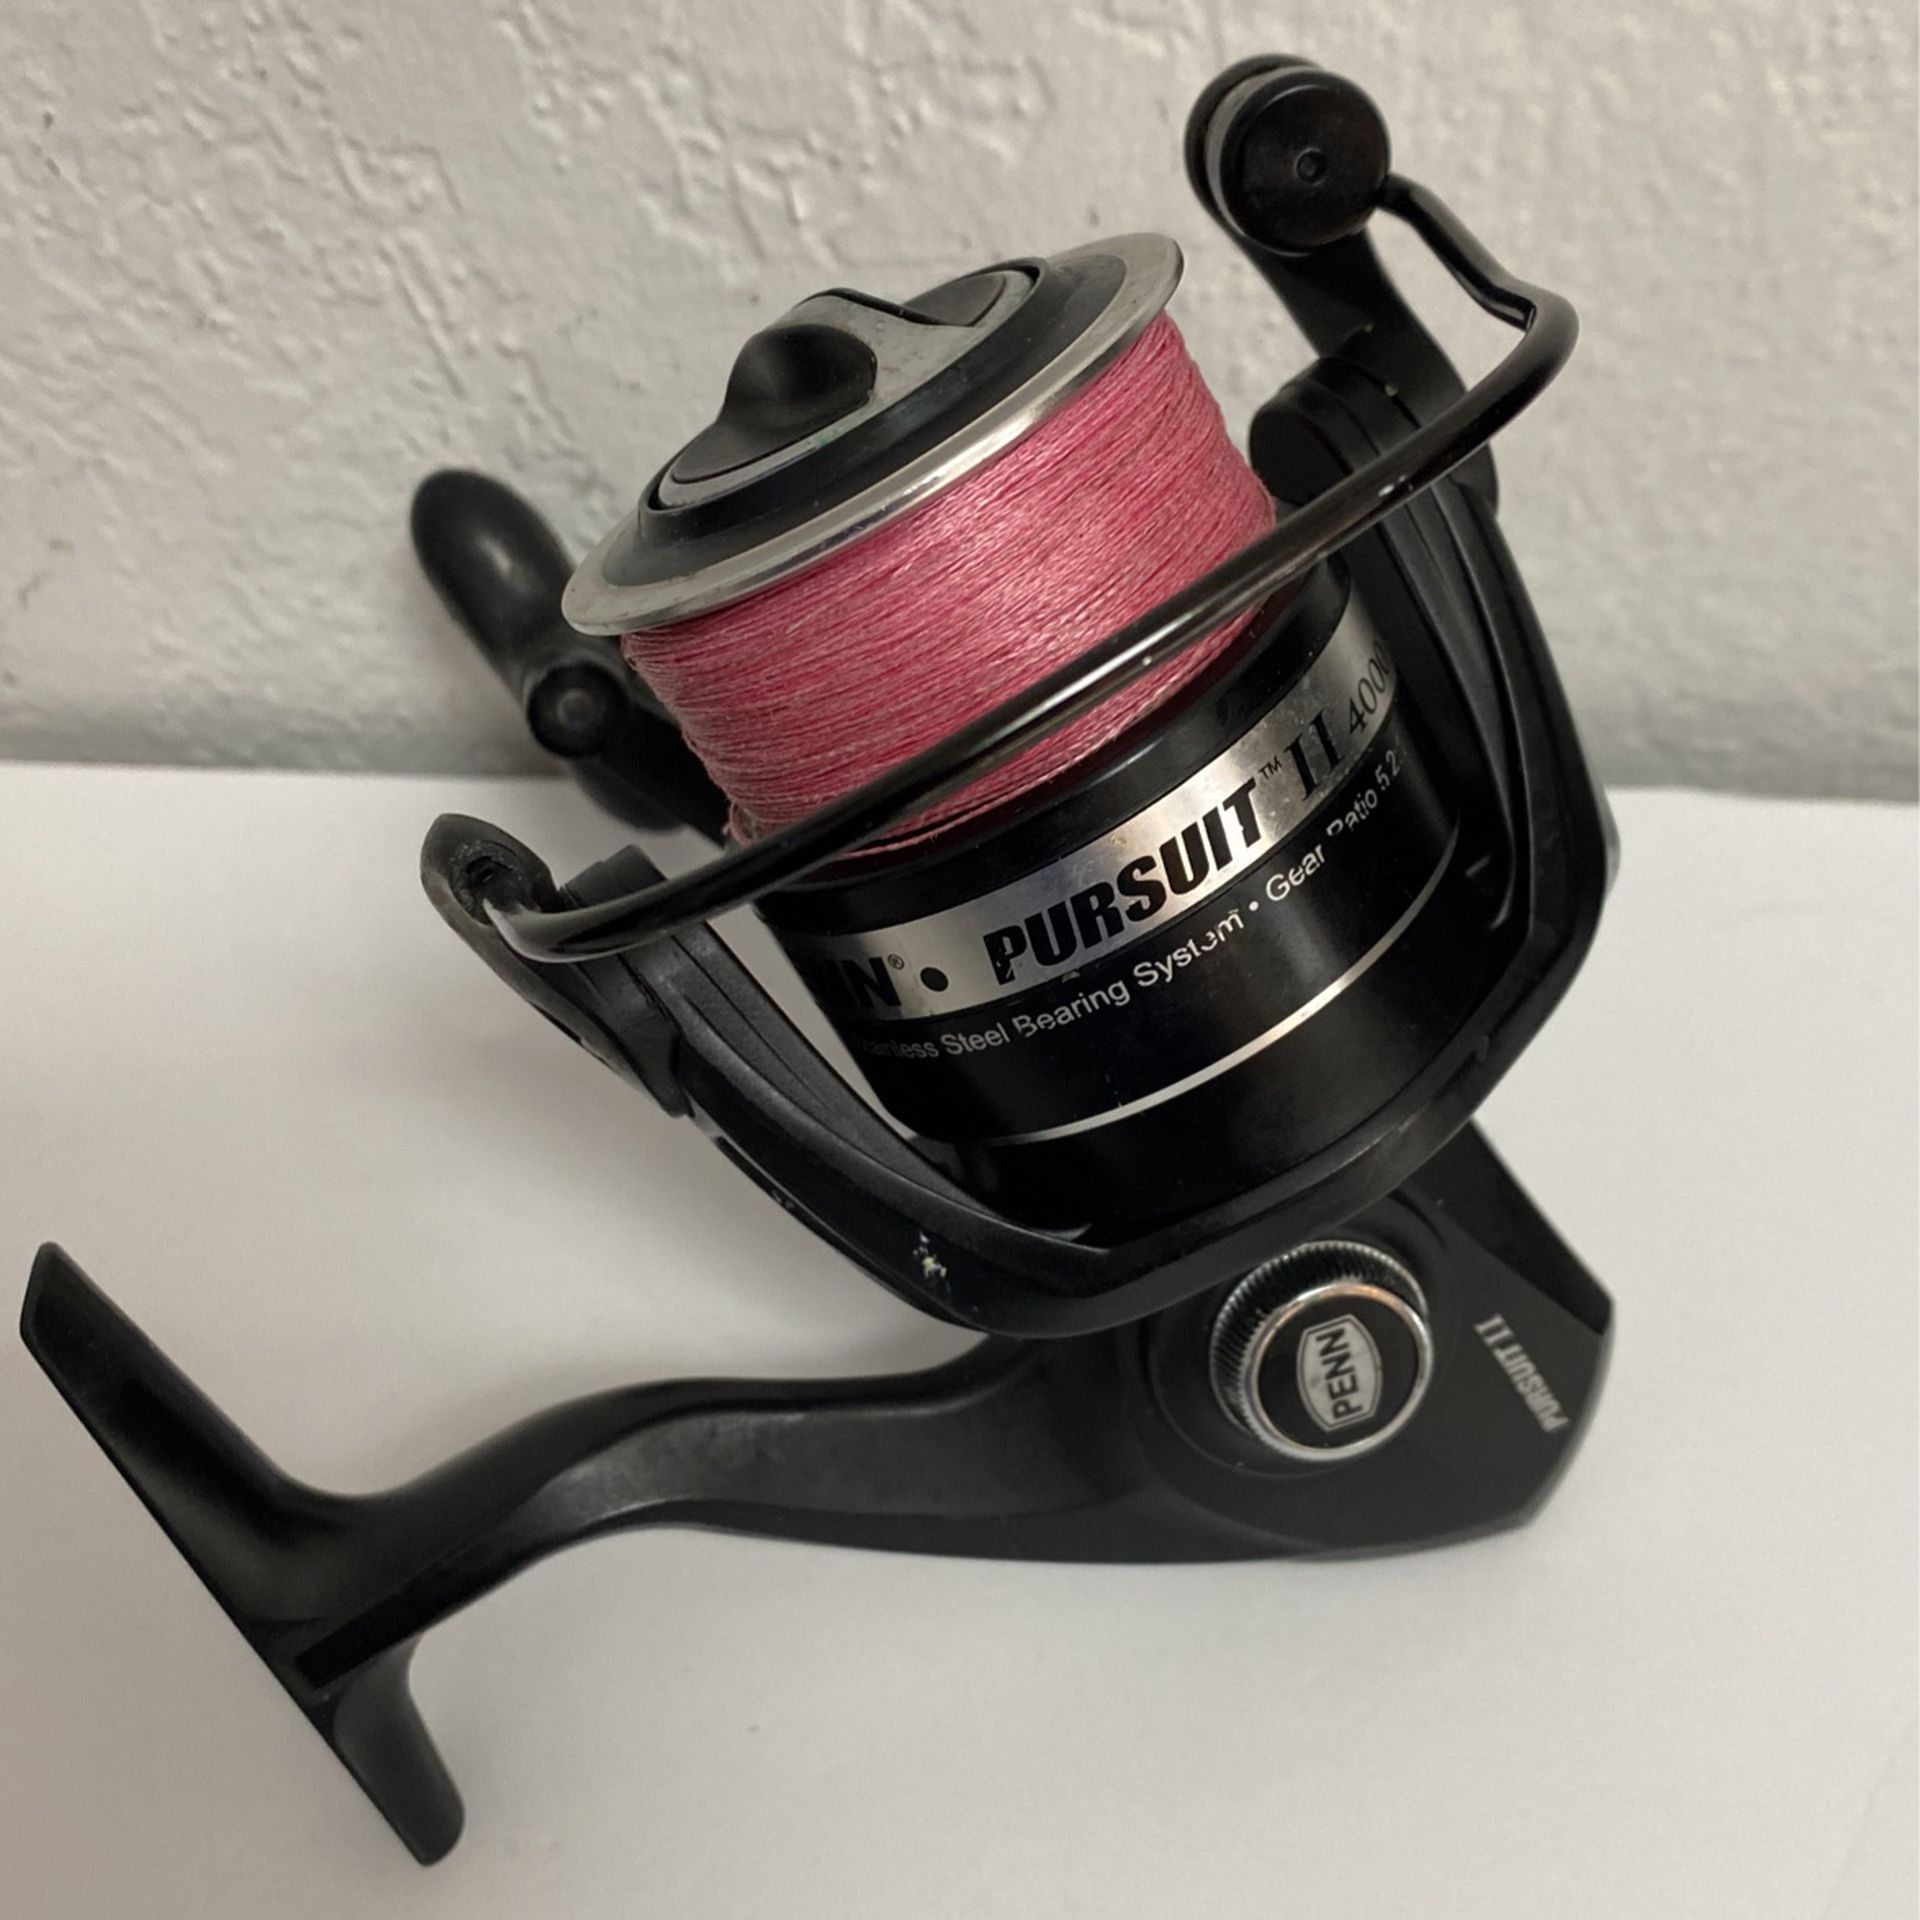 Penn Pursuit II 4000 Spinning Reel for Sale in Miami, FL - OfferUp